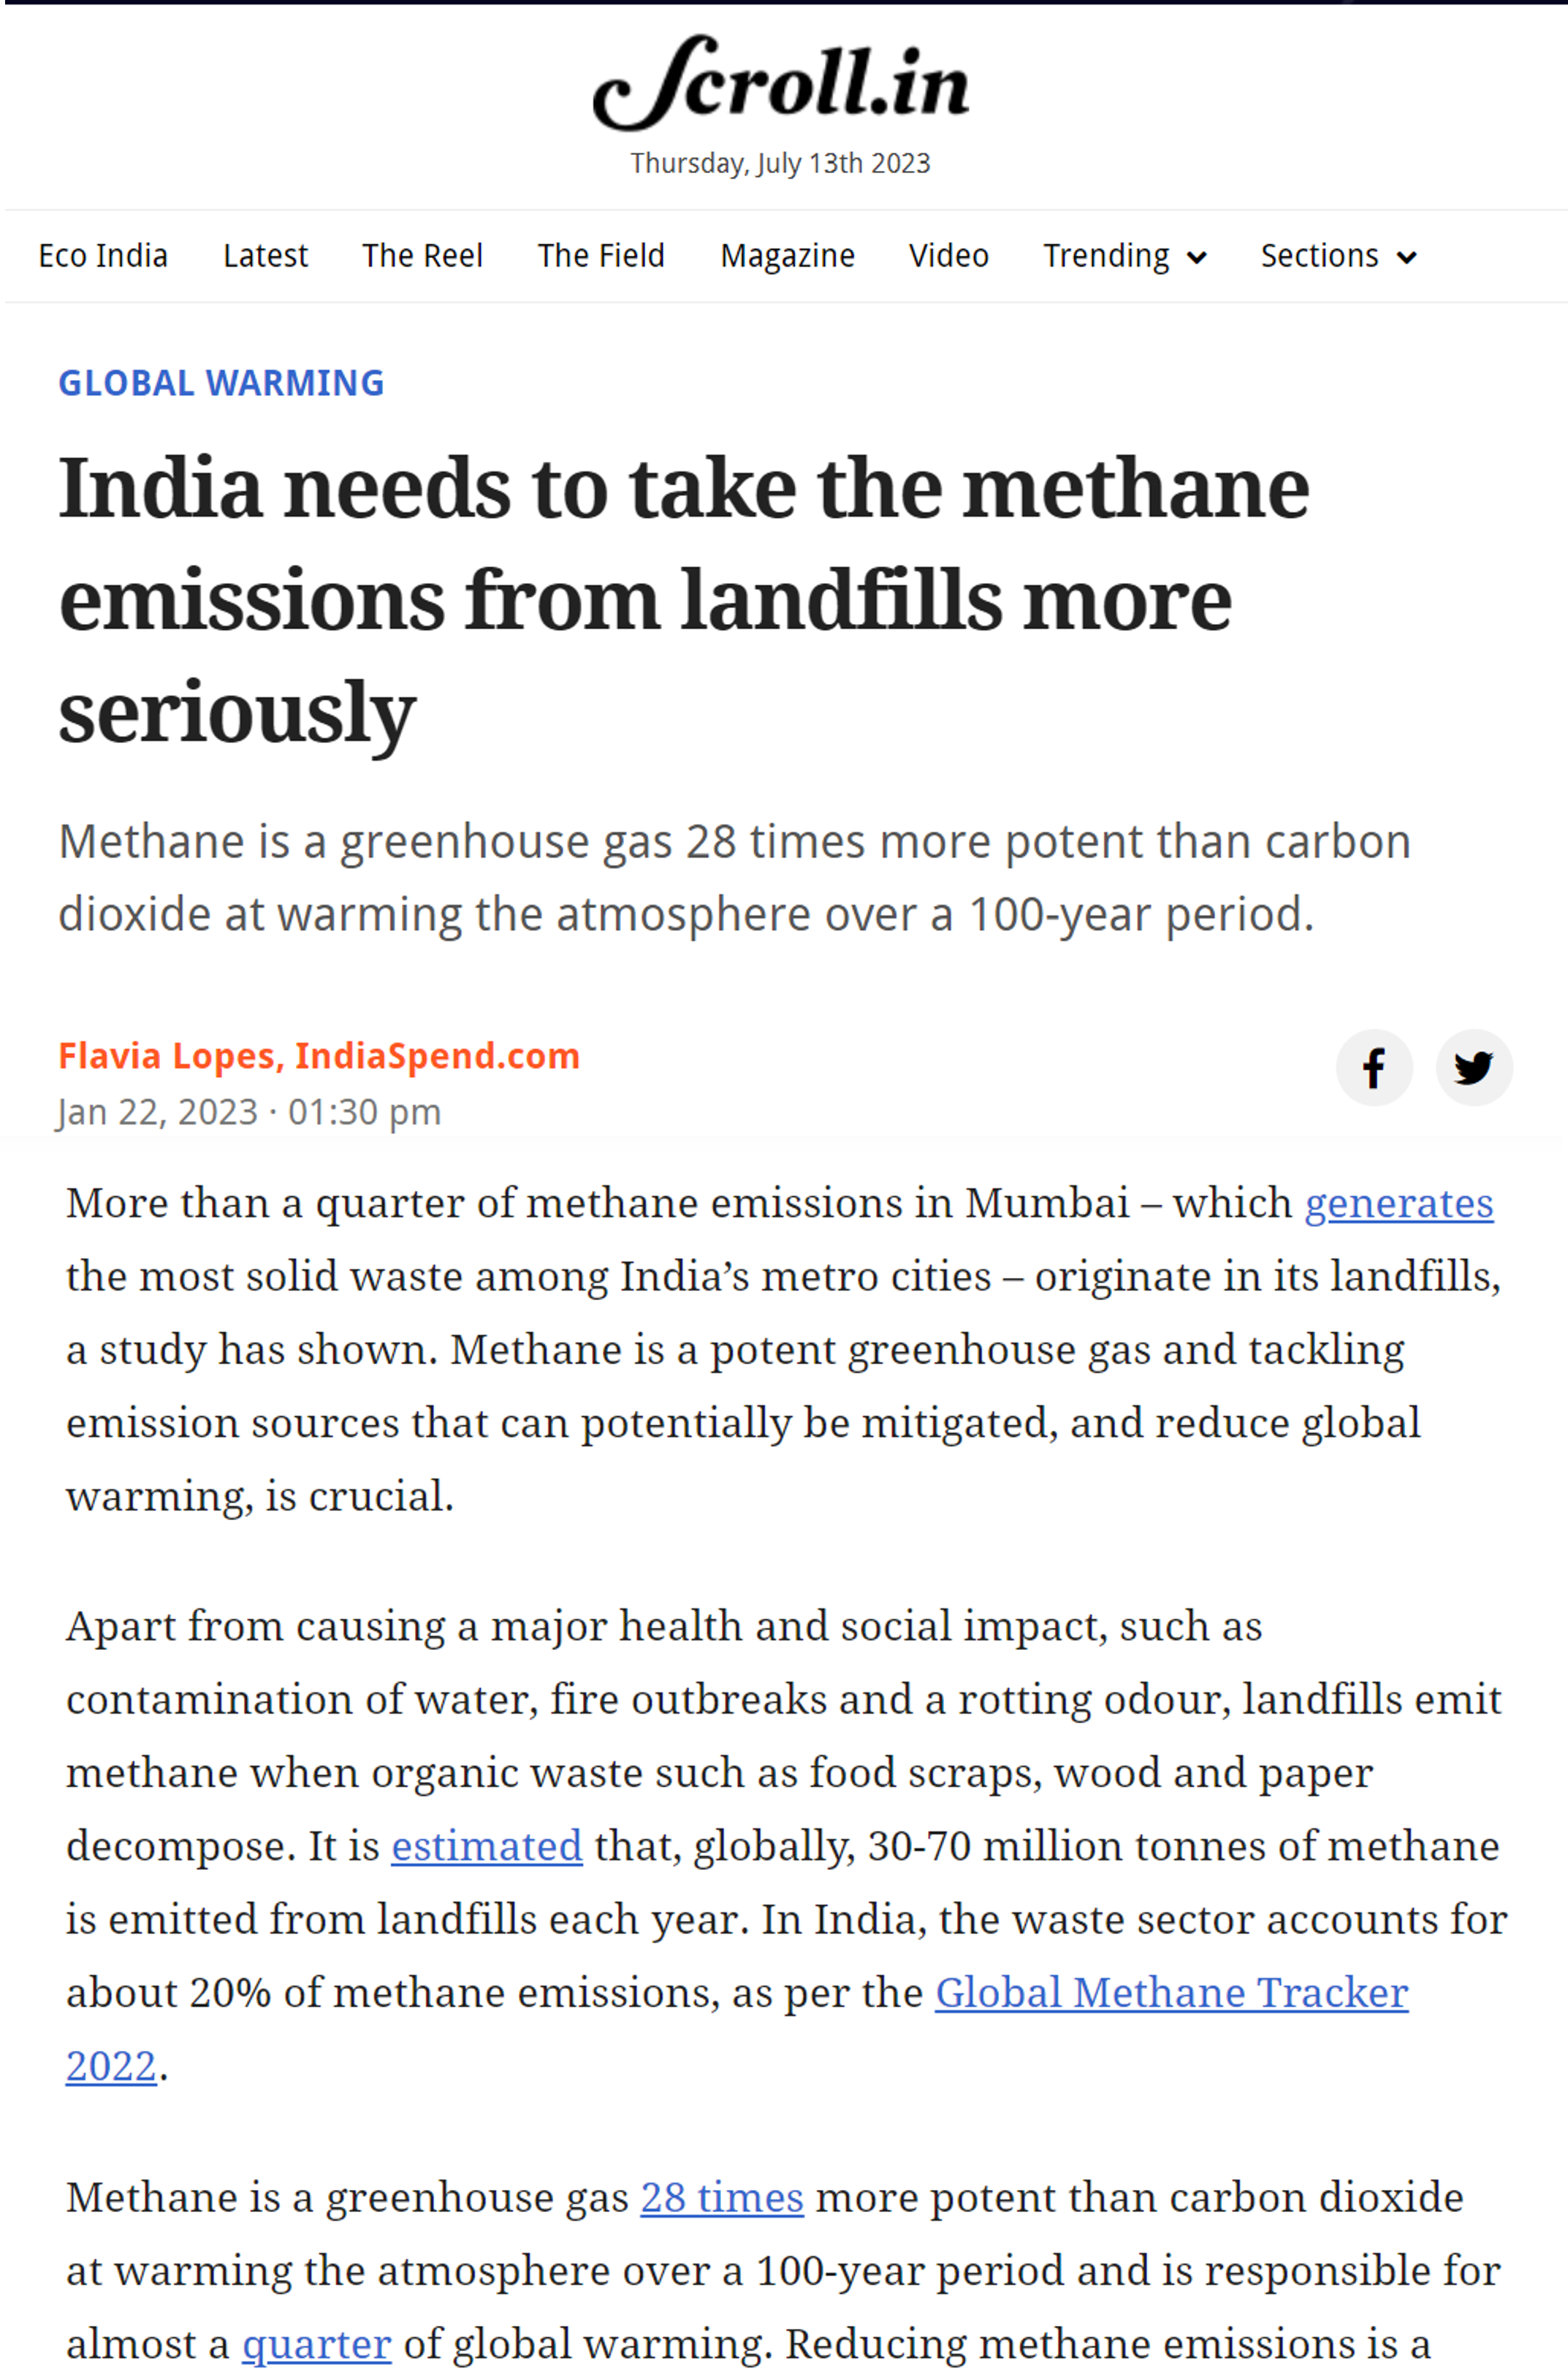 Pratima Singh quoted by Scroll on concerns regarding landfills